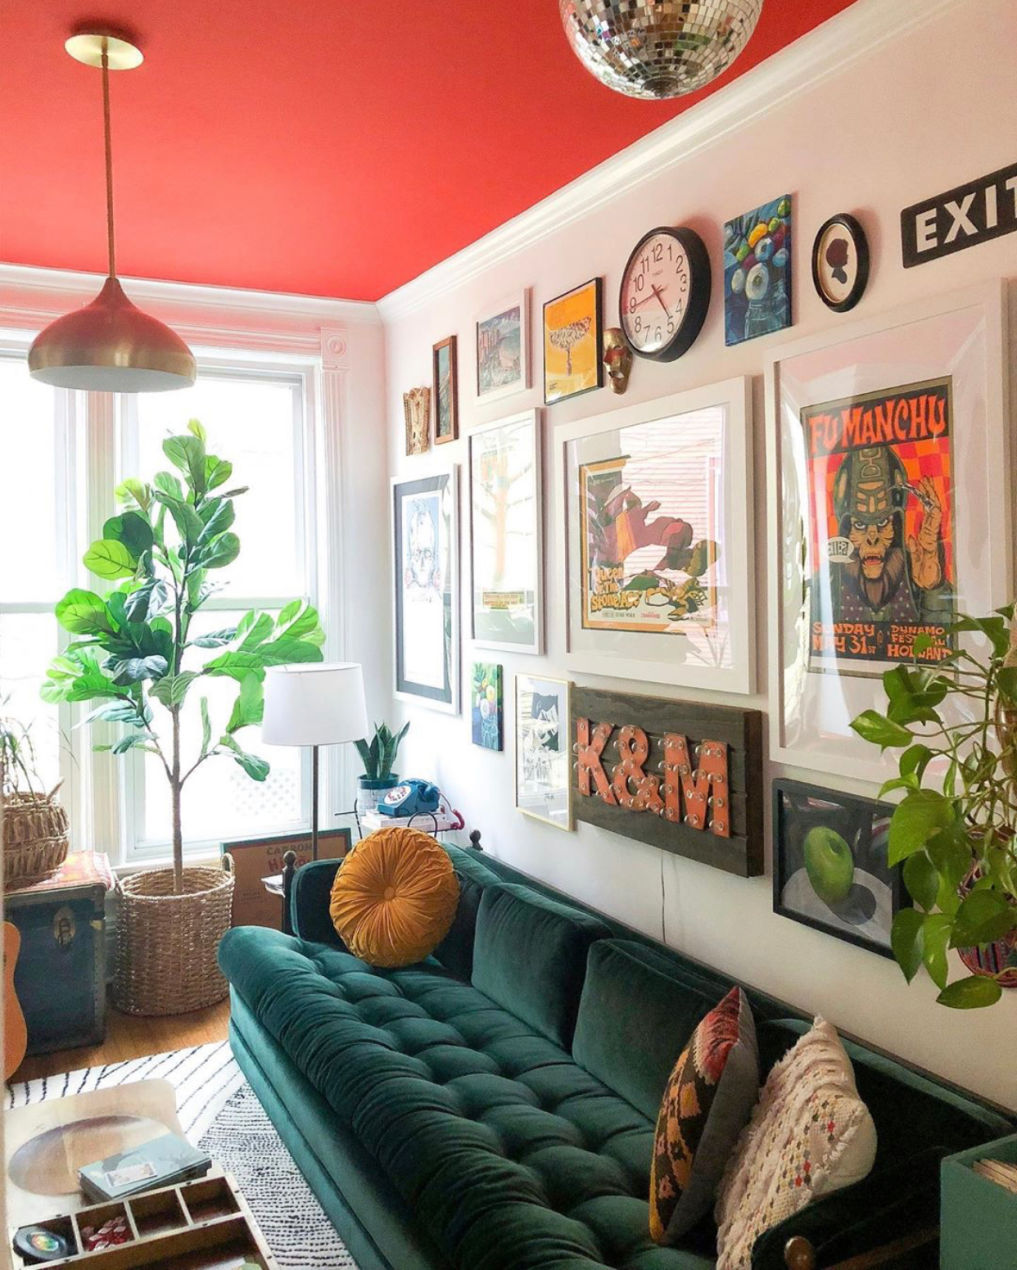 Love this colorful room with red ceiling, blue velvet sofa and eclectic gallery wall #gallerywall #velvetsofa #paintedceiling #colorfuldecor #colorlovers #eclecticdecor #vintagedecor #fiddleleaffig #bohodecor #redpaint #discoball #art #housetour